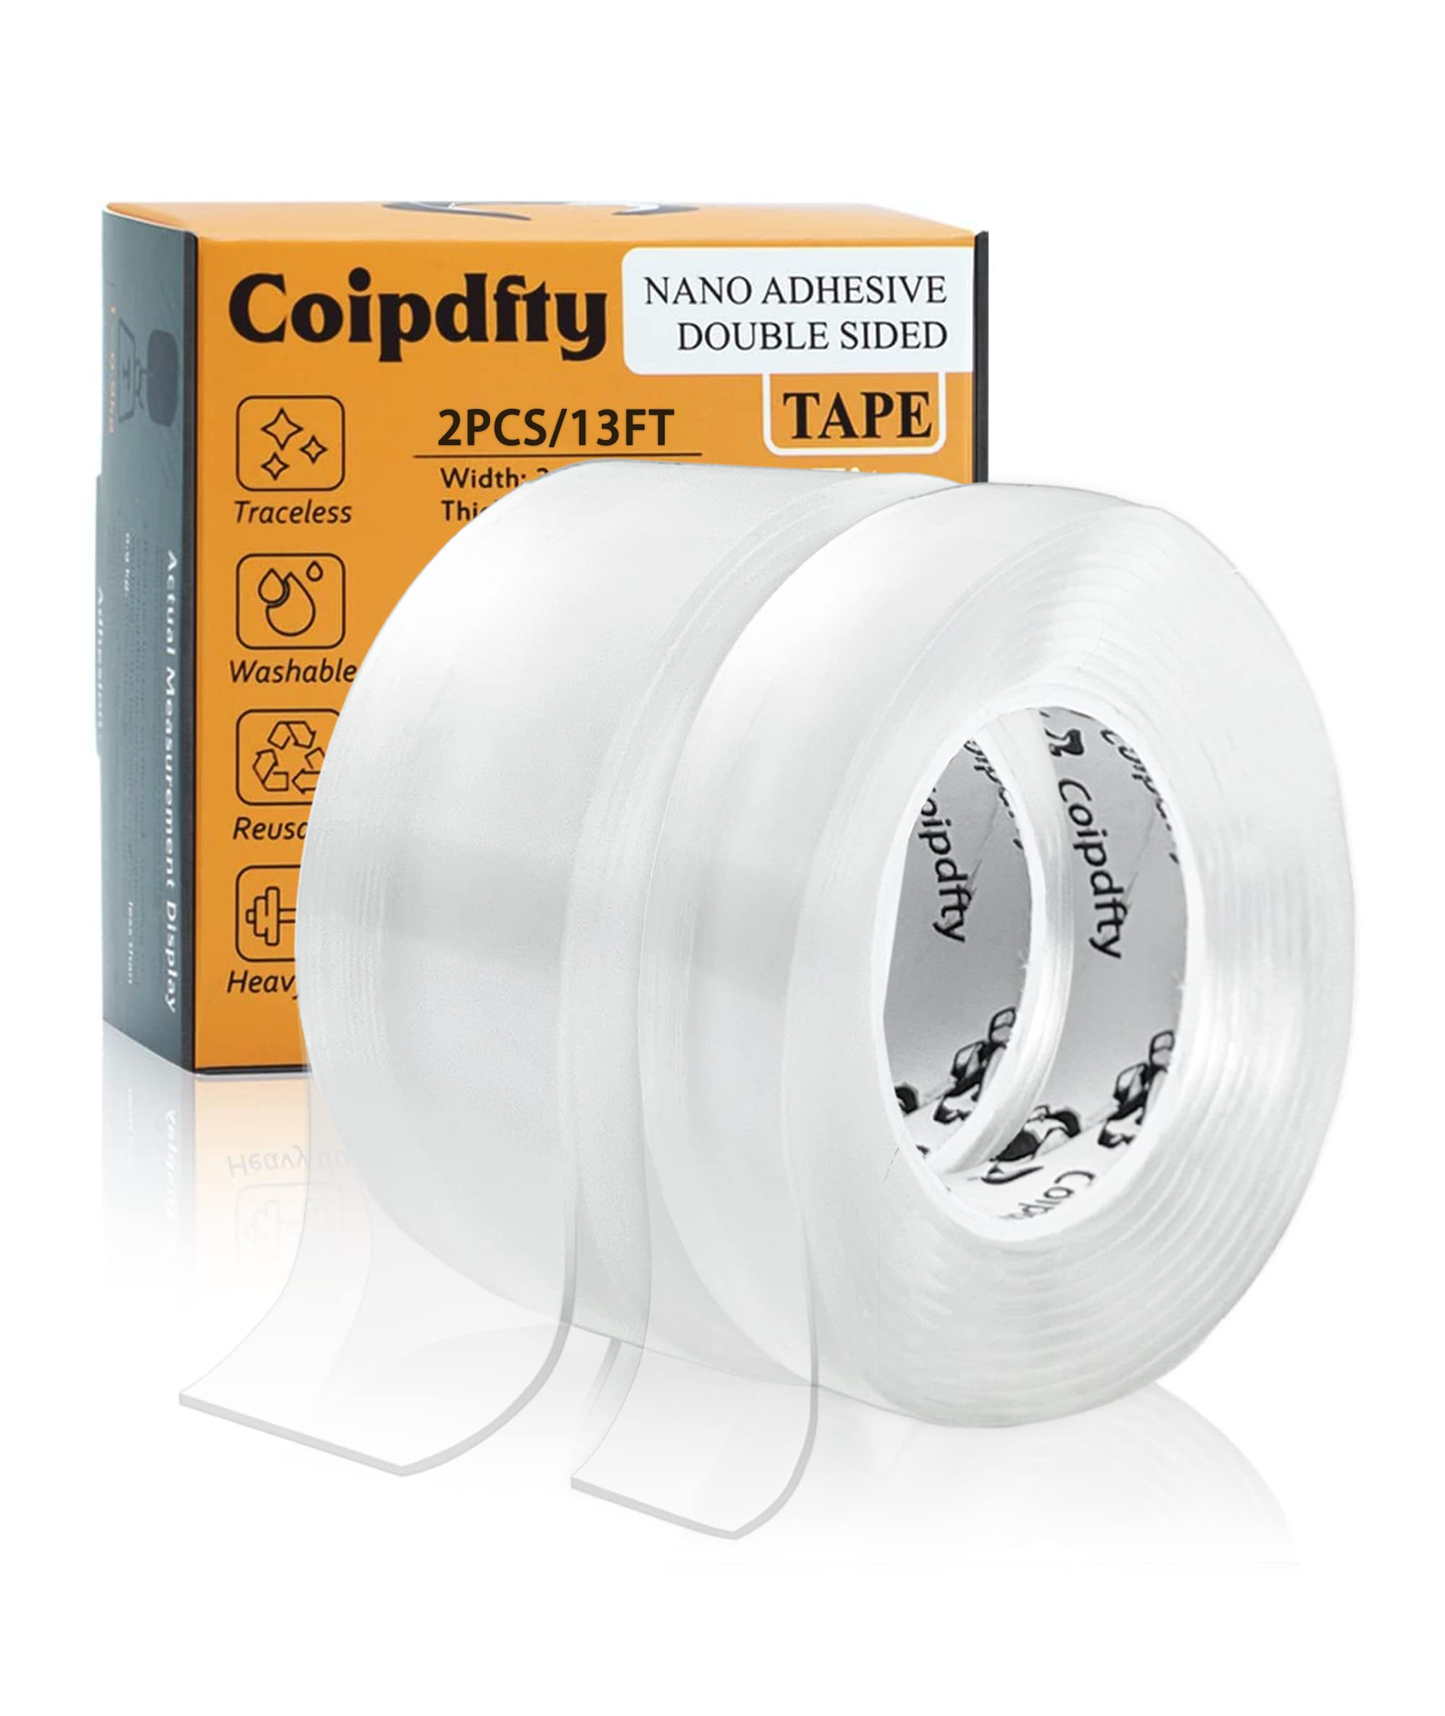 Non-marking washable double-sided tape reusable